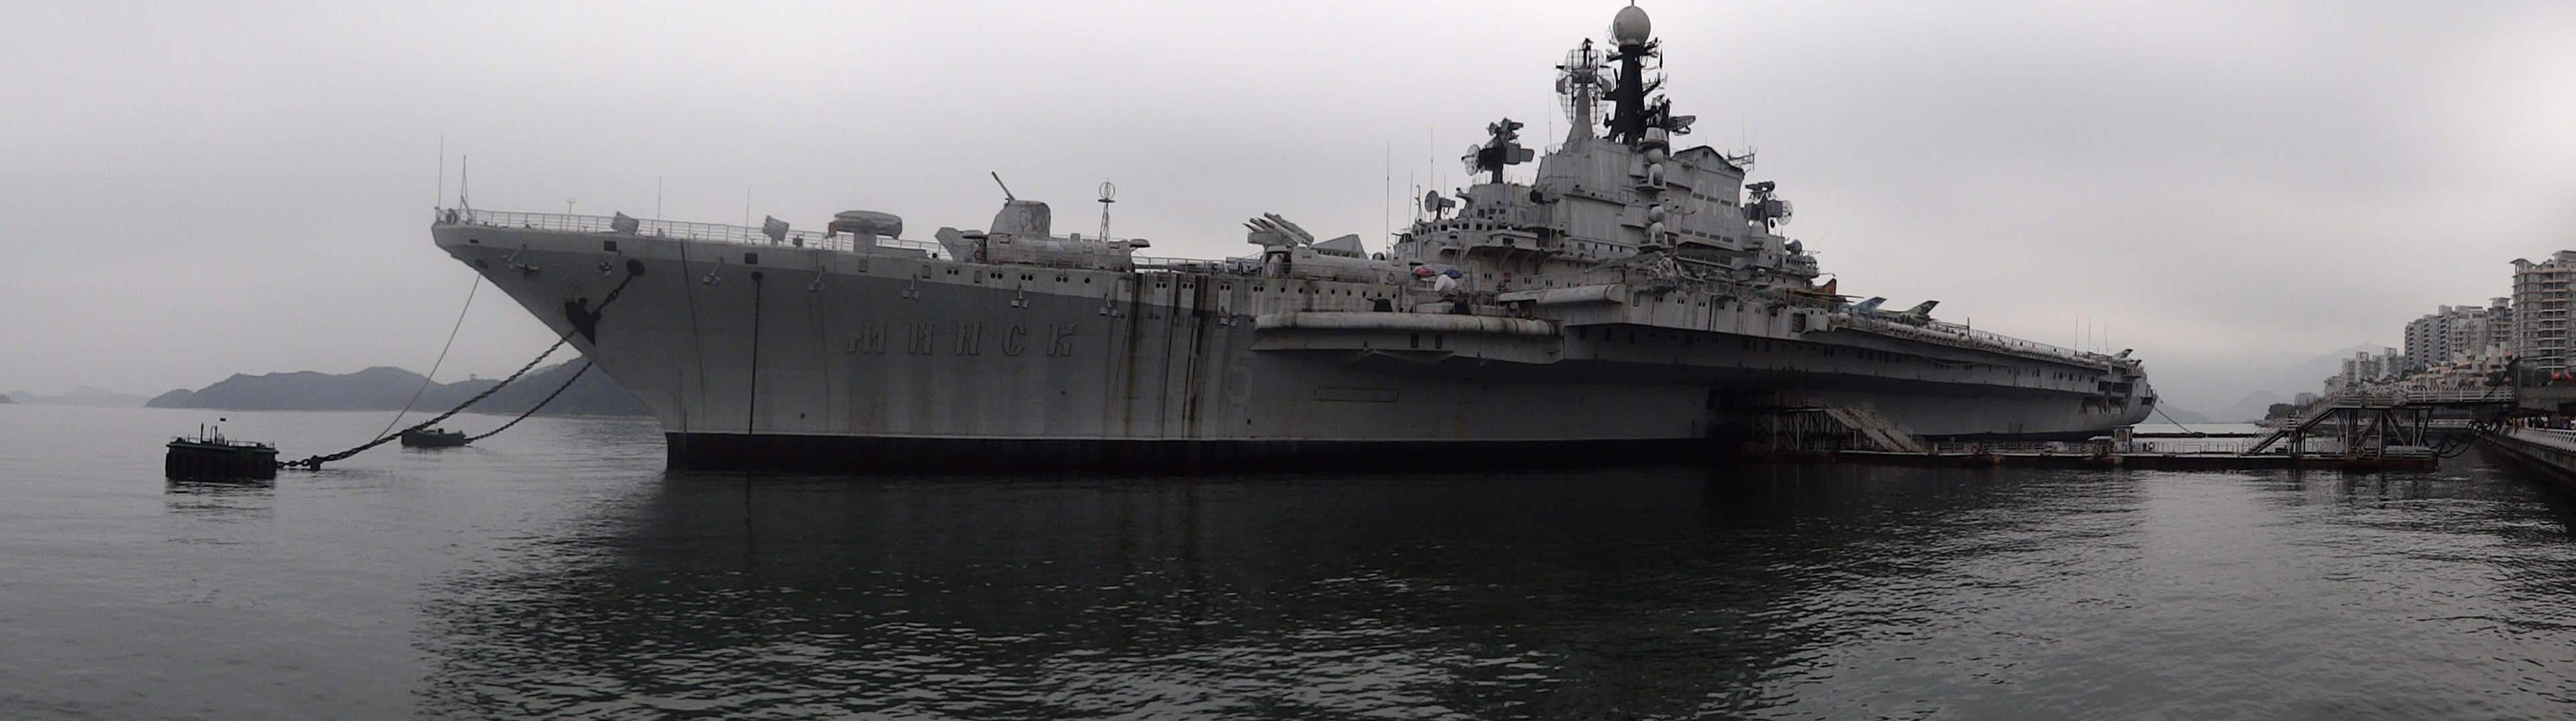 File:Panorama of the Soviet Aircraft Carrier Minsk at Minsk World, Shenzhen, China.jpg by Sudip2118